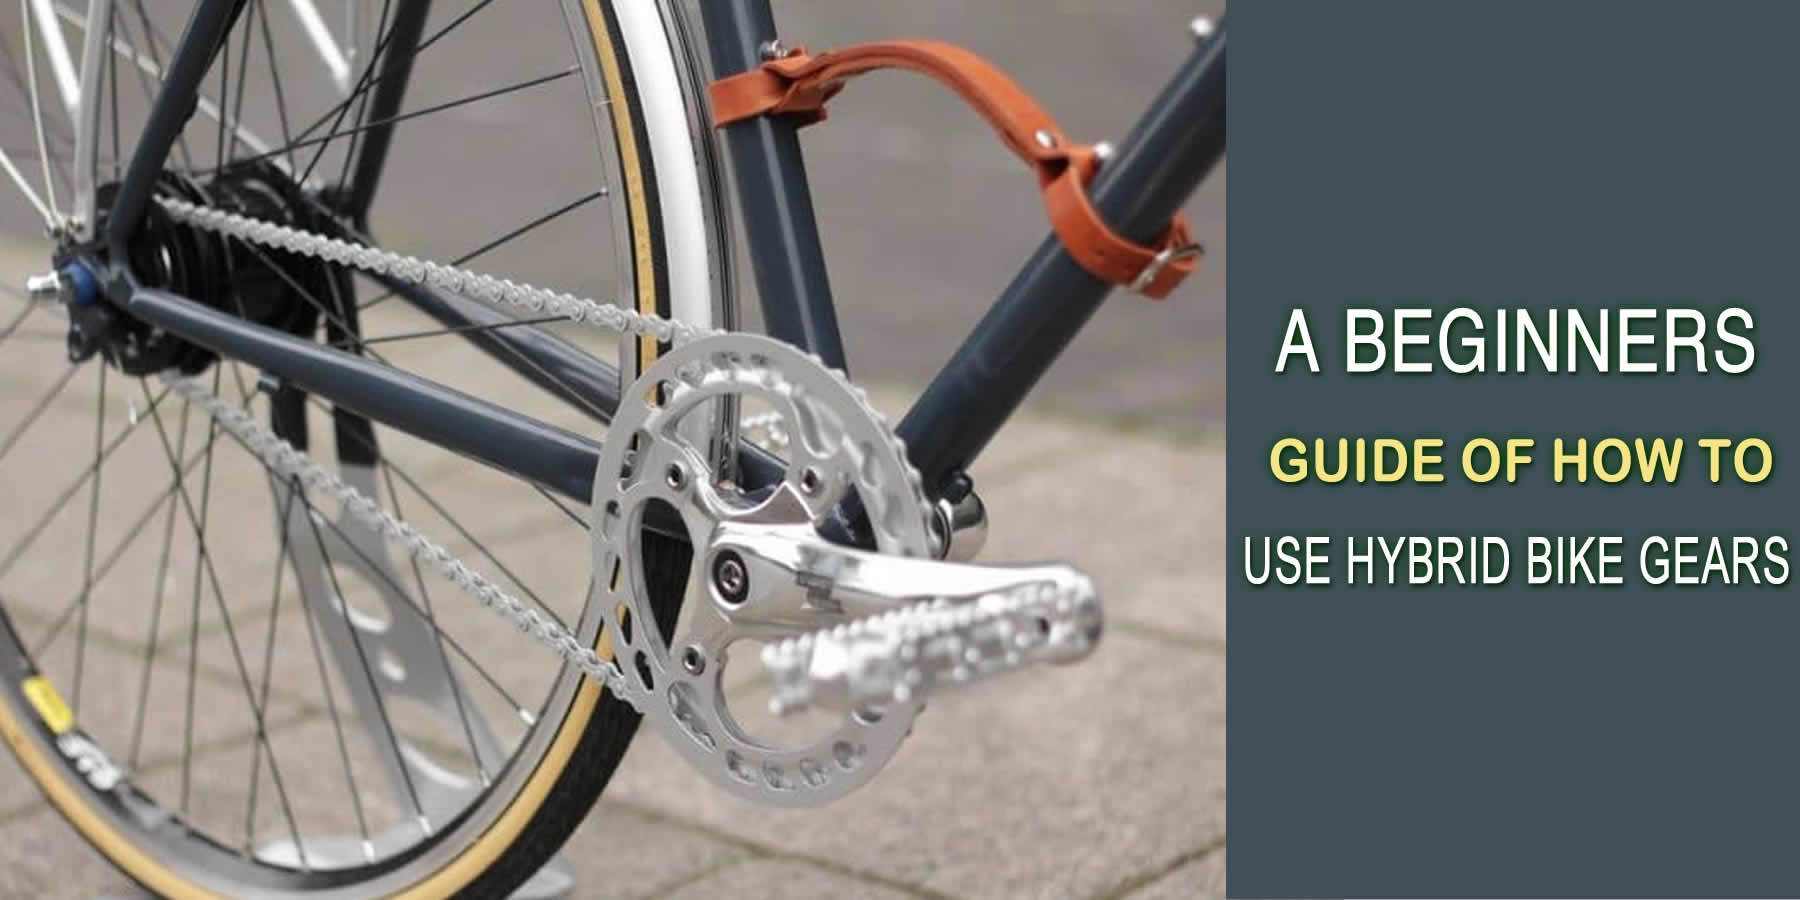 A Beginners Guide Of How To Use Hybrid Bike Gears